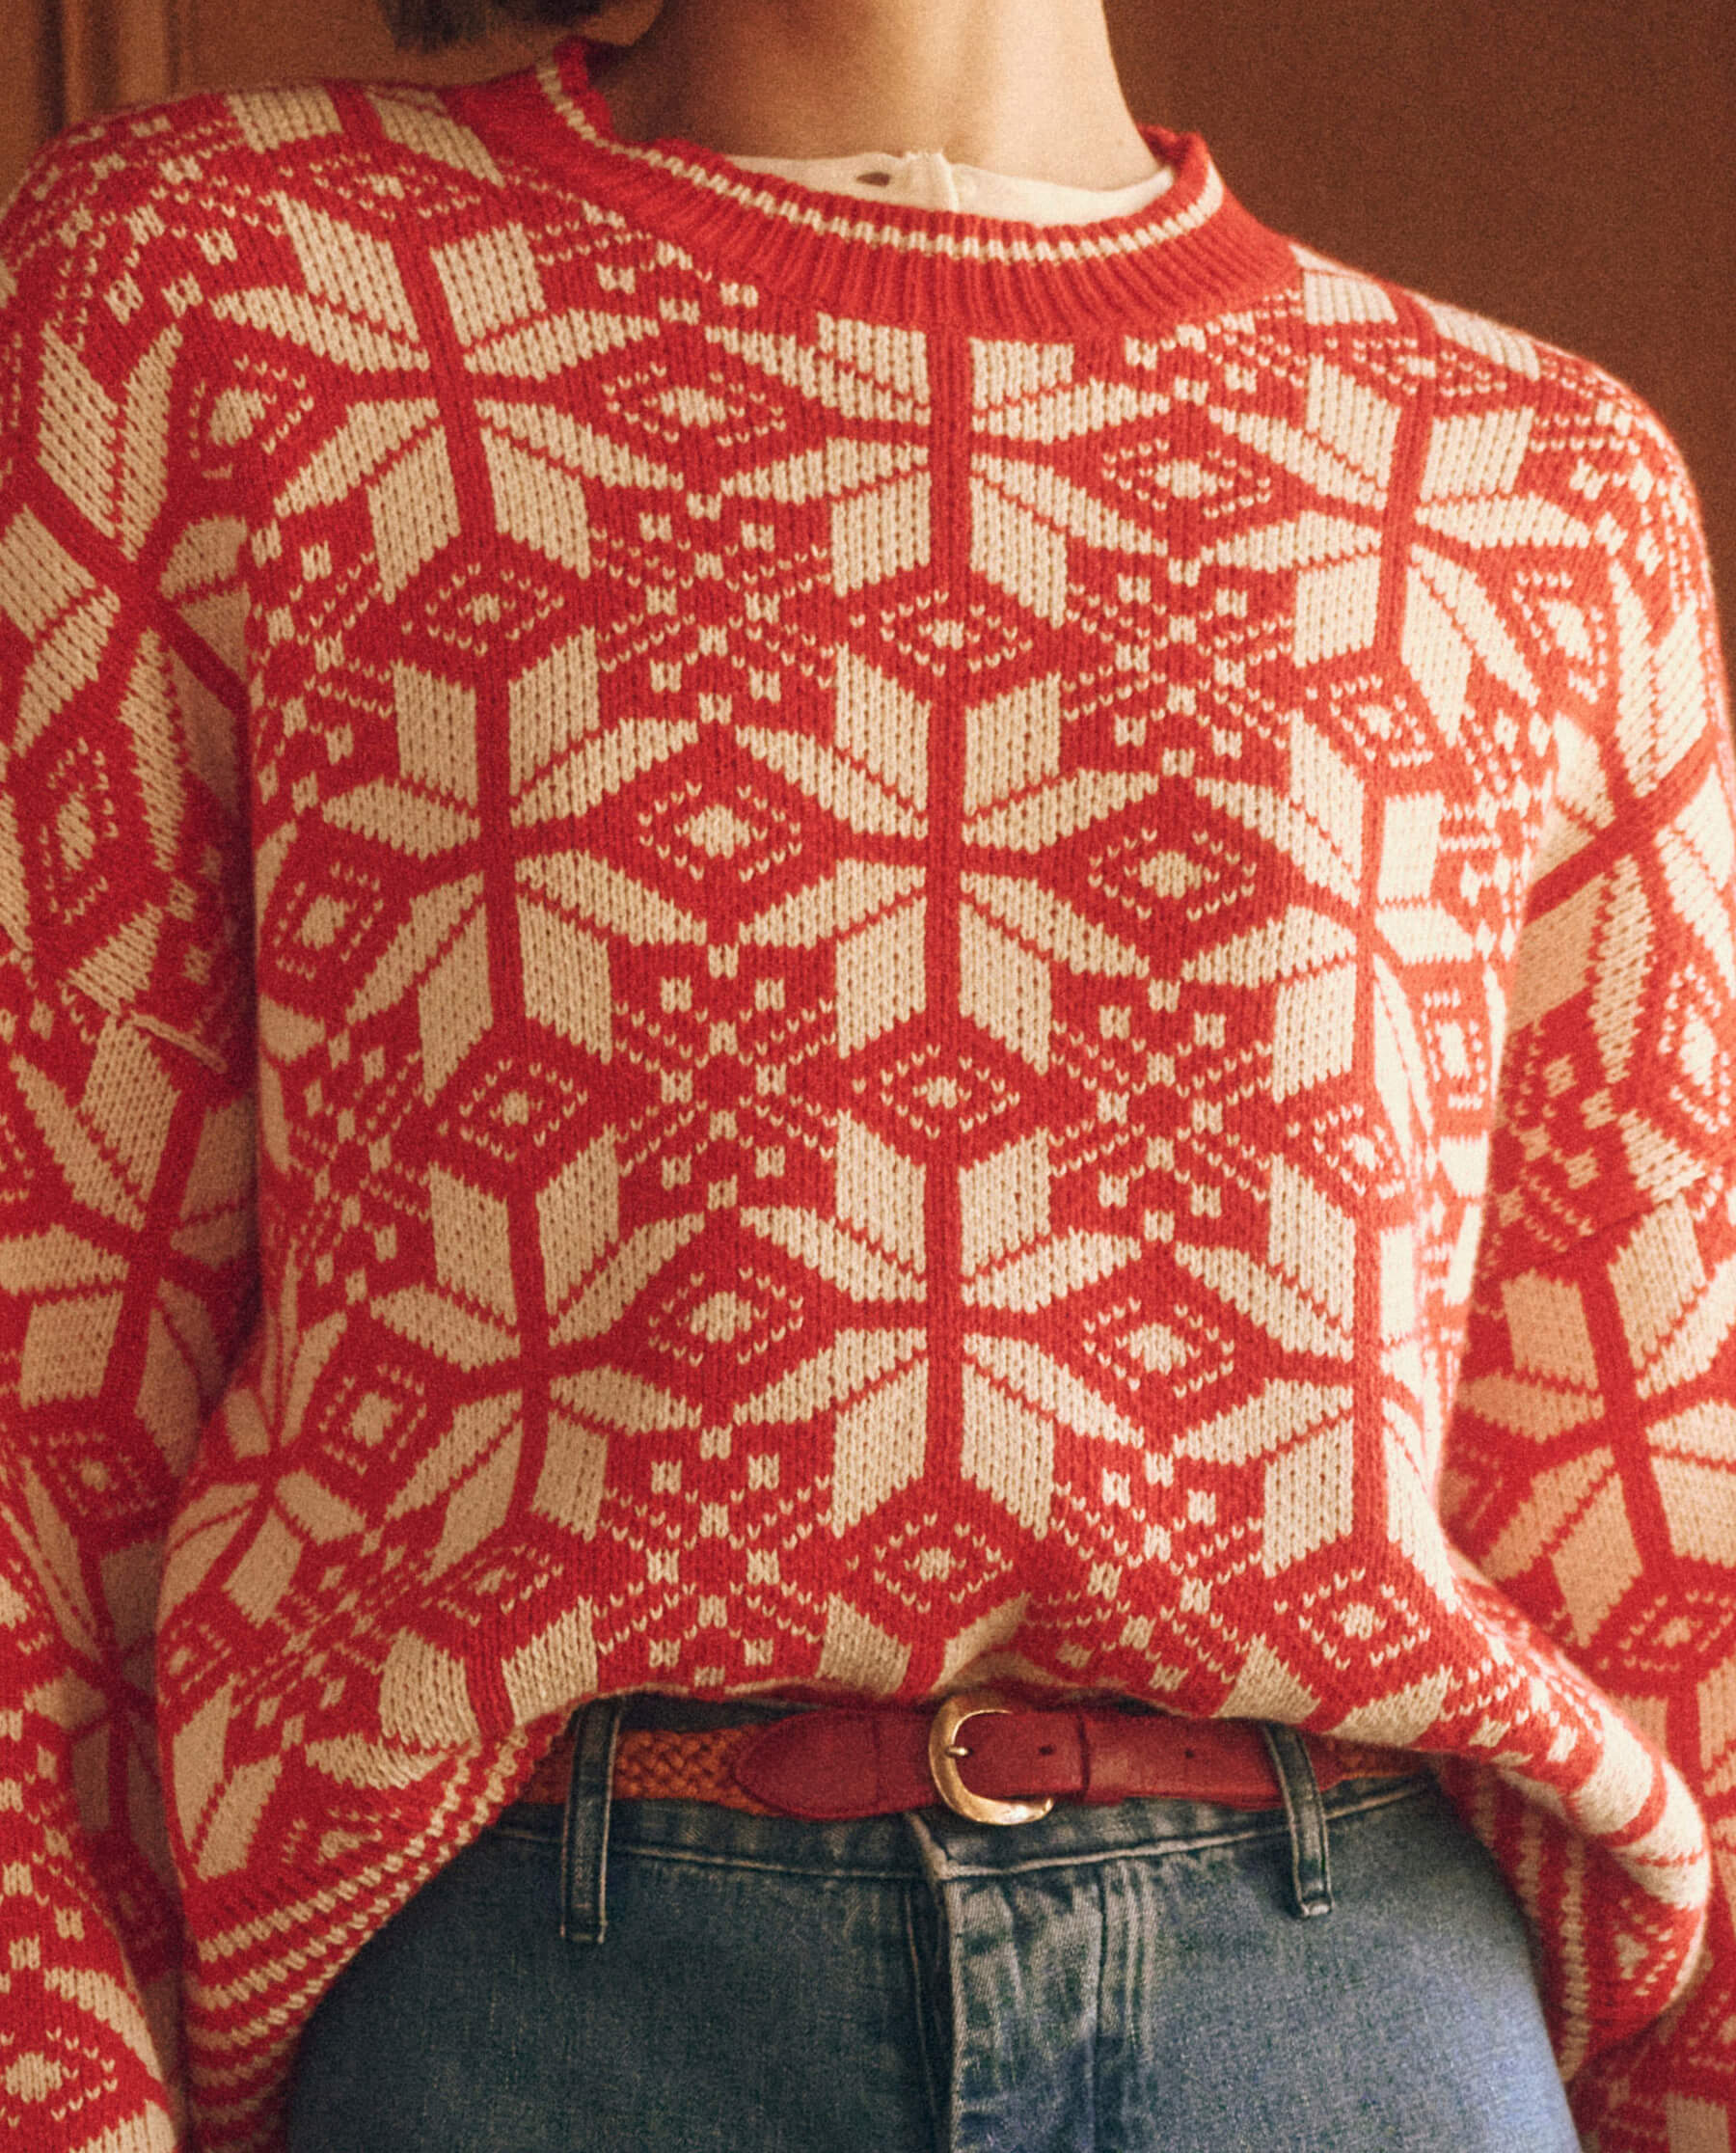 The Snowflake Pullover. -- Alpine Spice SWEATERS THE GREAT. HOL 23 D1 SALE